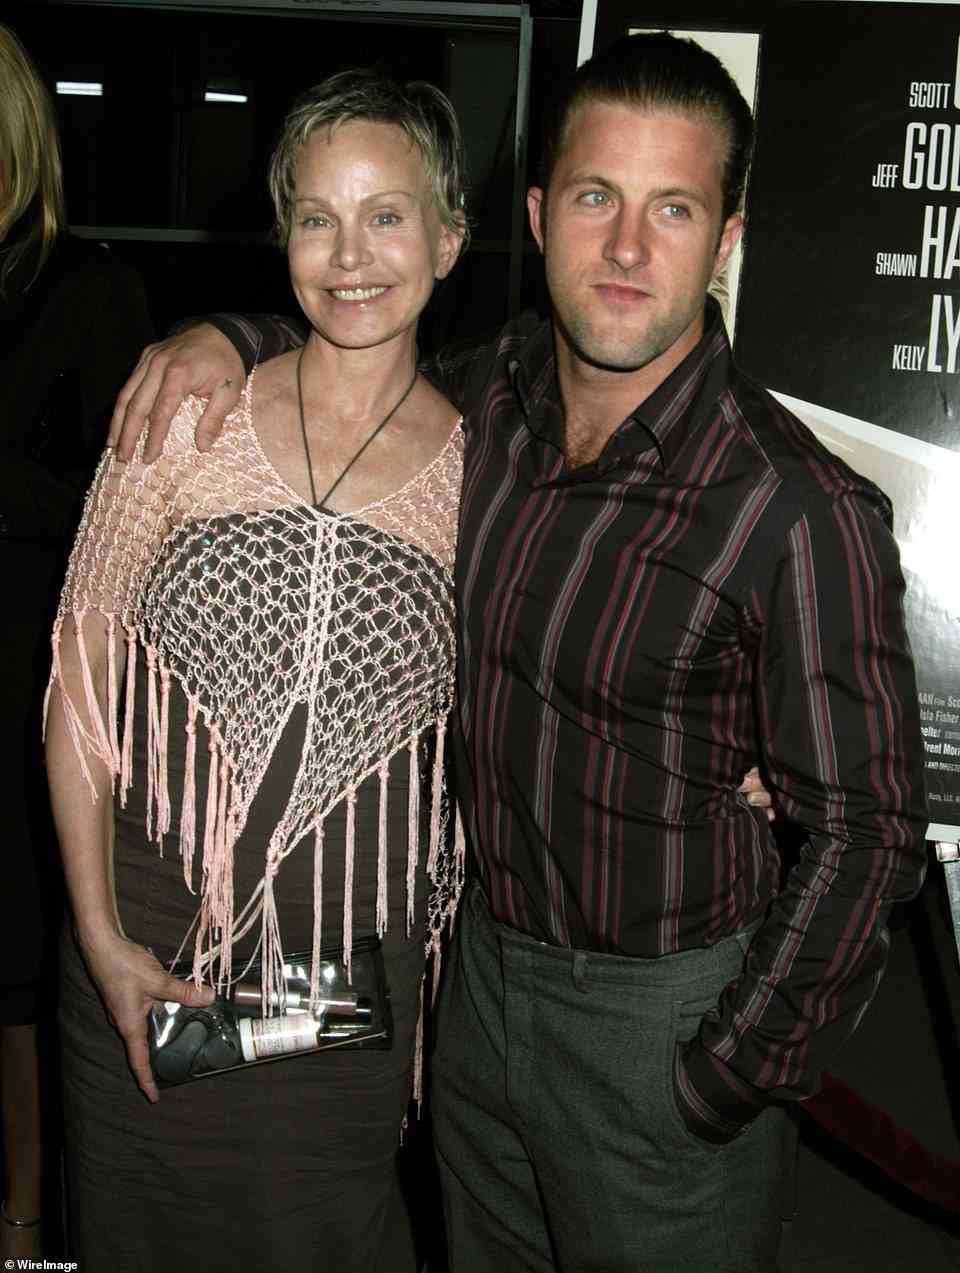 Stokes with her son, actor Scott Caan, before her death in 2012. She died of cancer at the age of 60